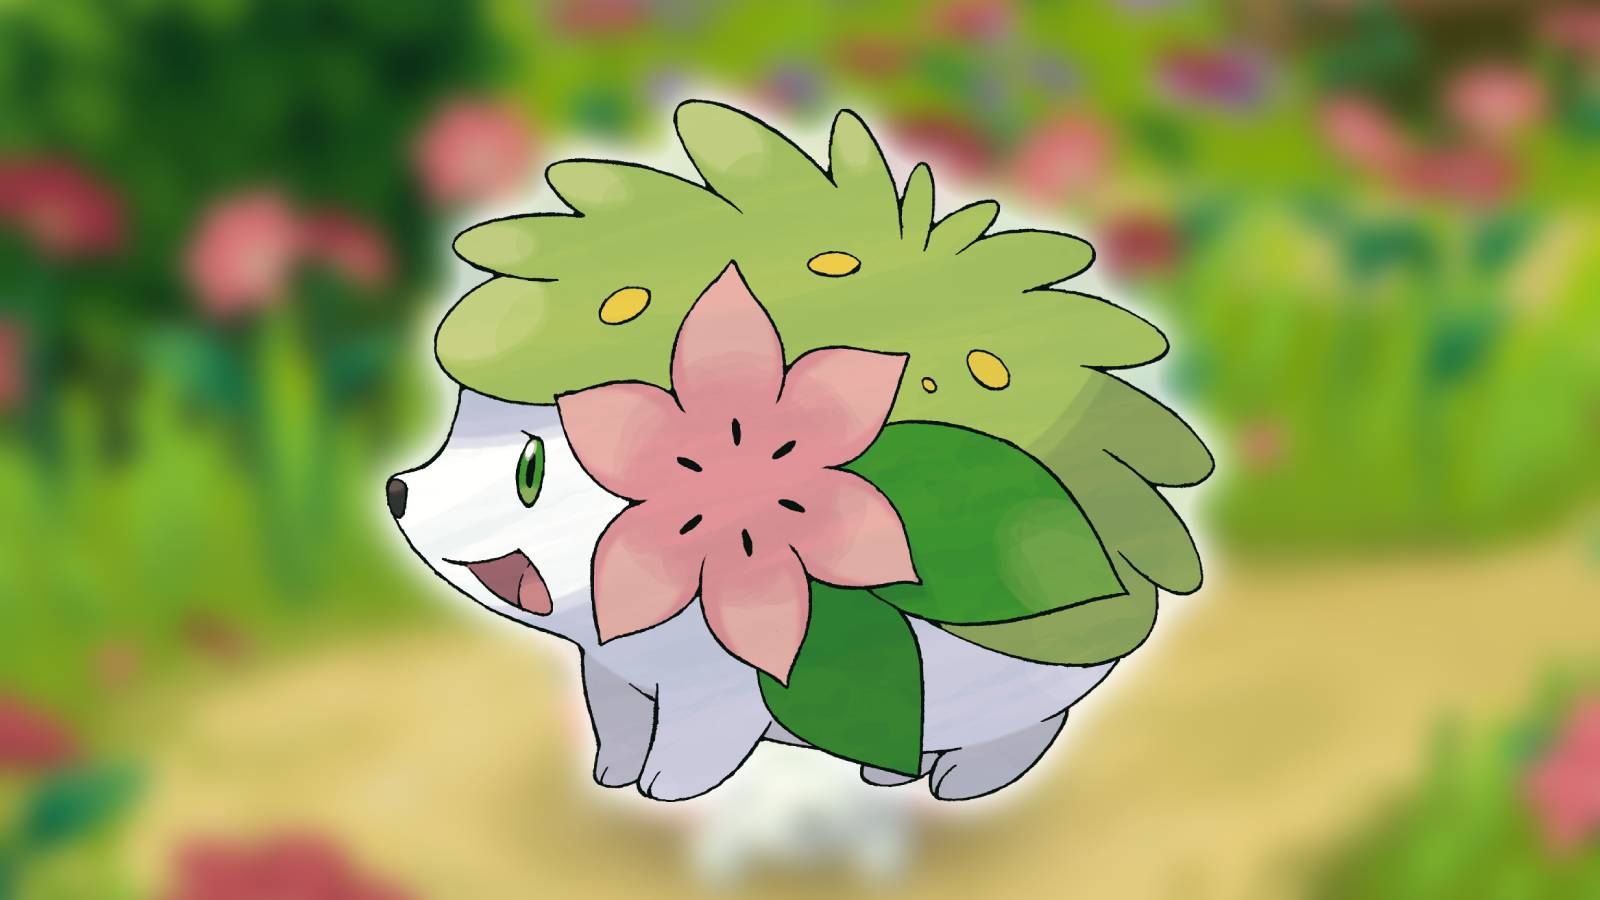 Shaymin appeaers against a blurred floral background